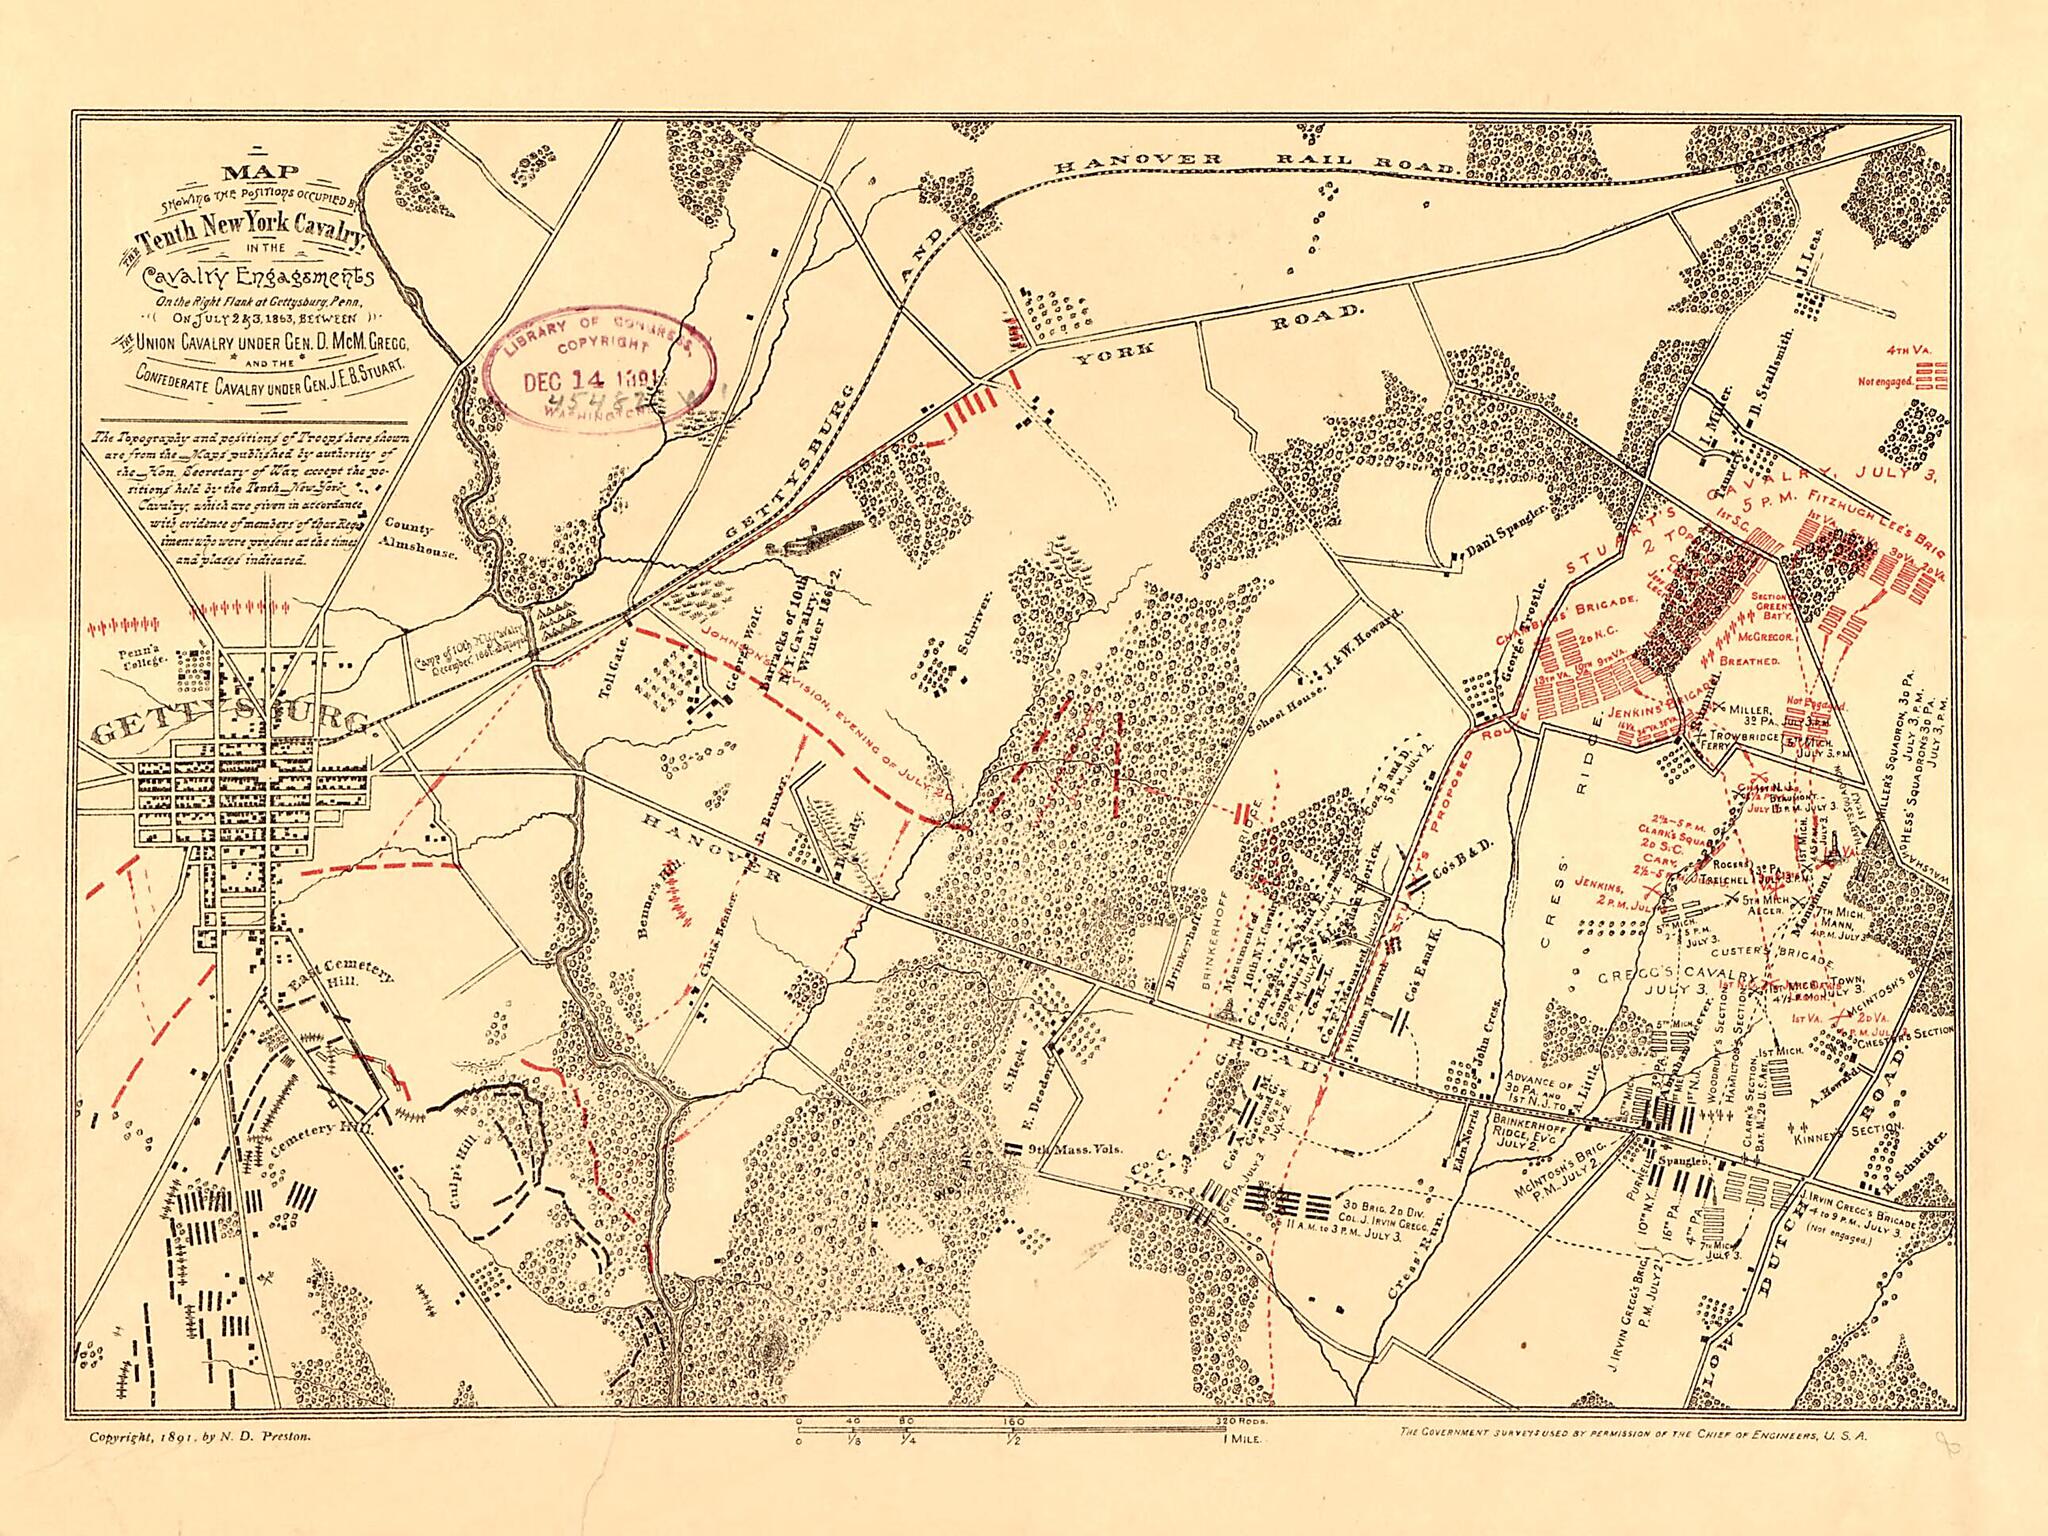 This old map of Map Showing the Positions Occupied by the Tenth New York Cavalry In the Cavalry Engagements On the Right Flank at Gettysburg, Pennsylvania : On July 2 &amp; 3, from 1863, Between the Union Cavalry Under Gen. D. McM. Gregg and the Confederate 